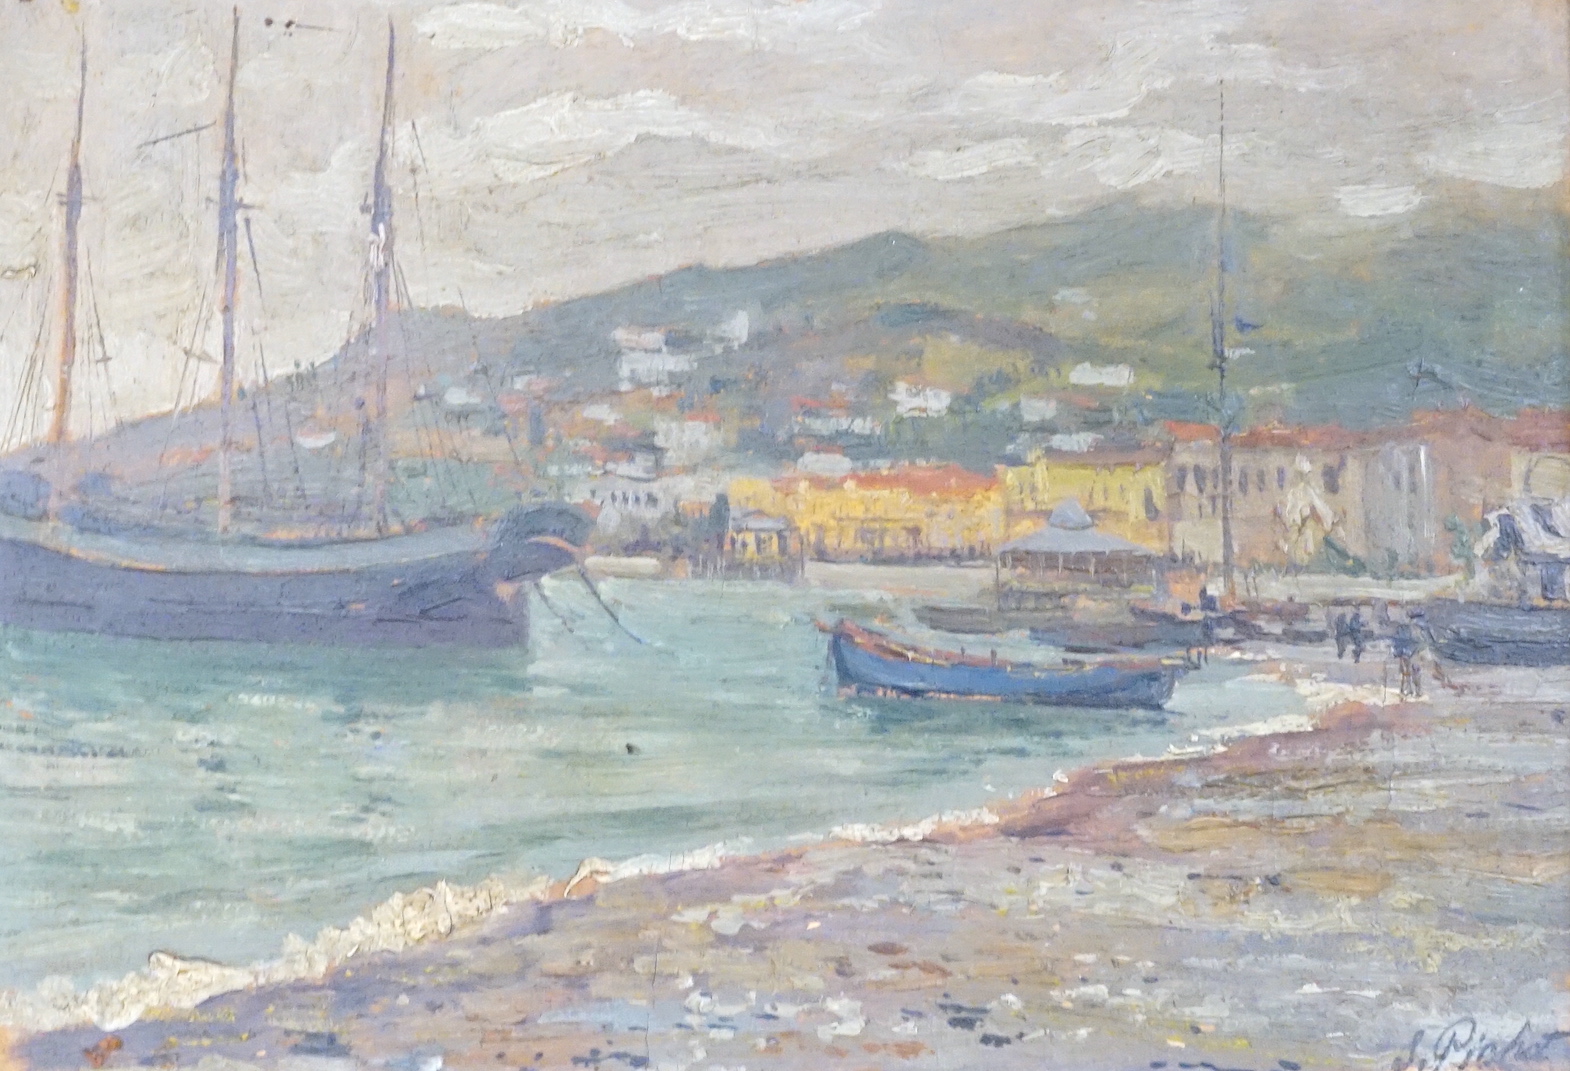 S. Pichot, oil on board, Boats moored along the coast, signed, label verso for Galea’s of Valetta, 21 x 31.5cm